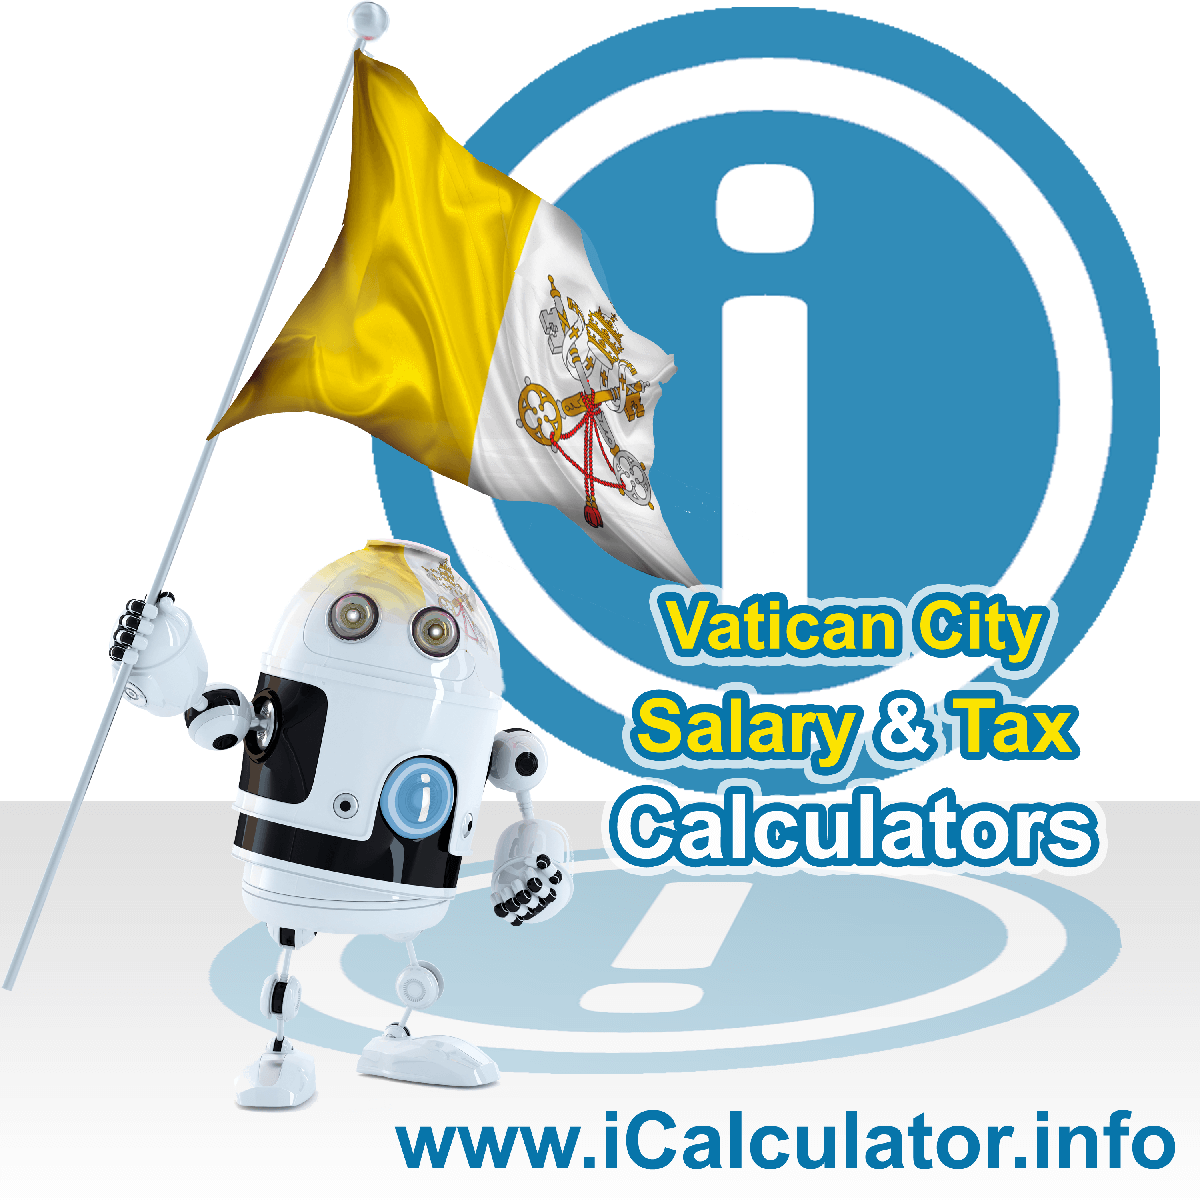 Vatican City Salary Calculator. This image shows the Vatican Cityese flag and information relating to the tax formula for the Vatican City Tax Calculator